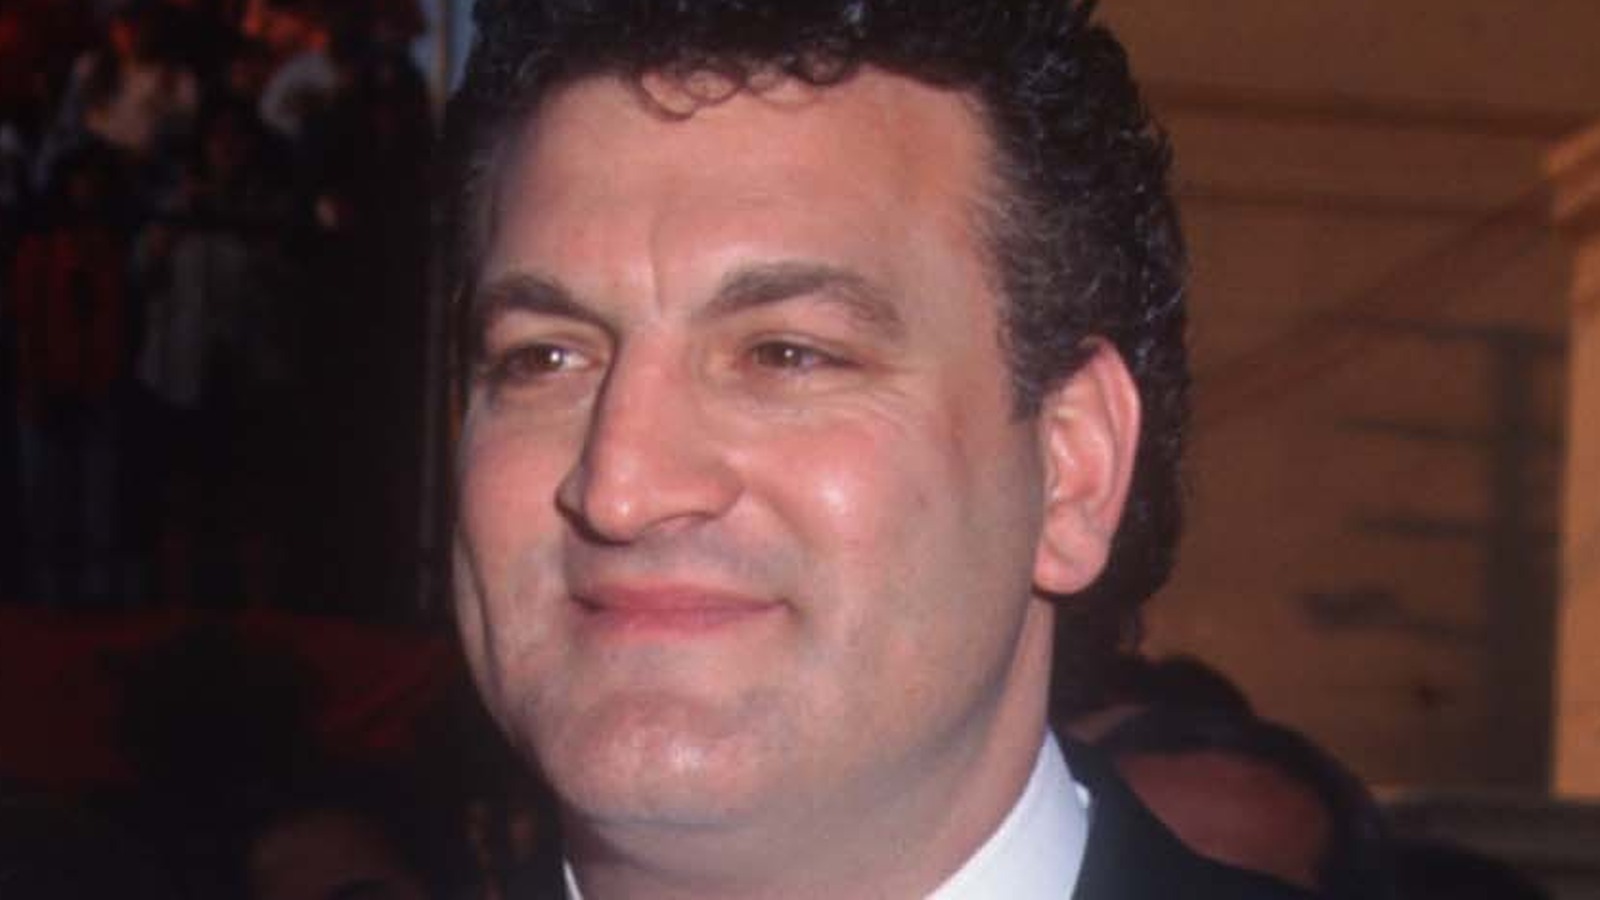 Heres What Happened To Joey Buttafuoco image